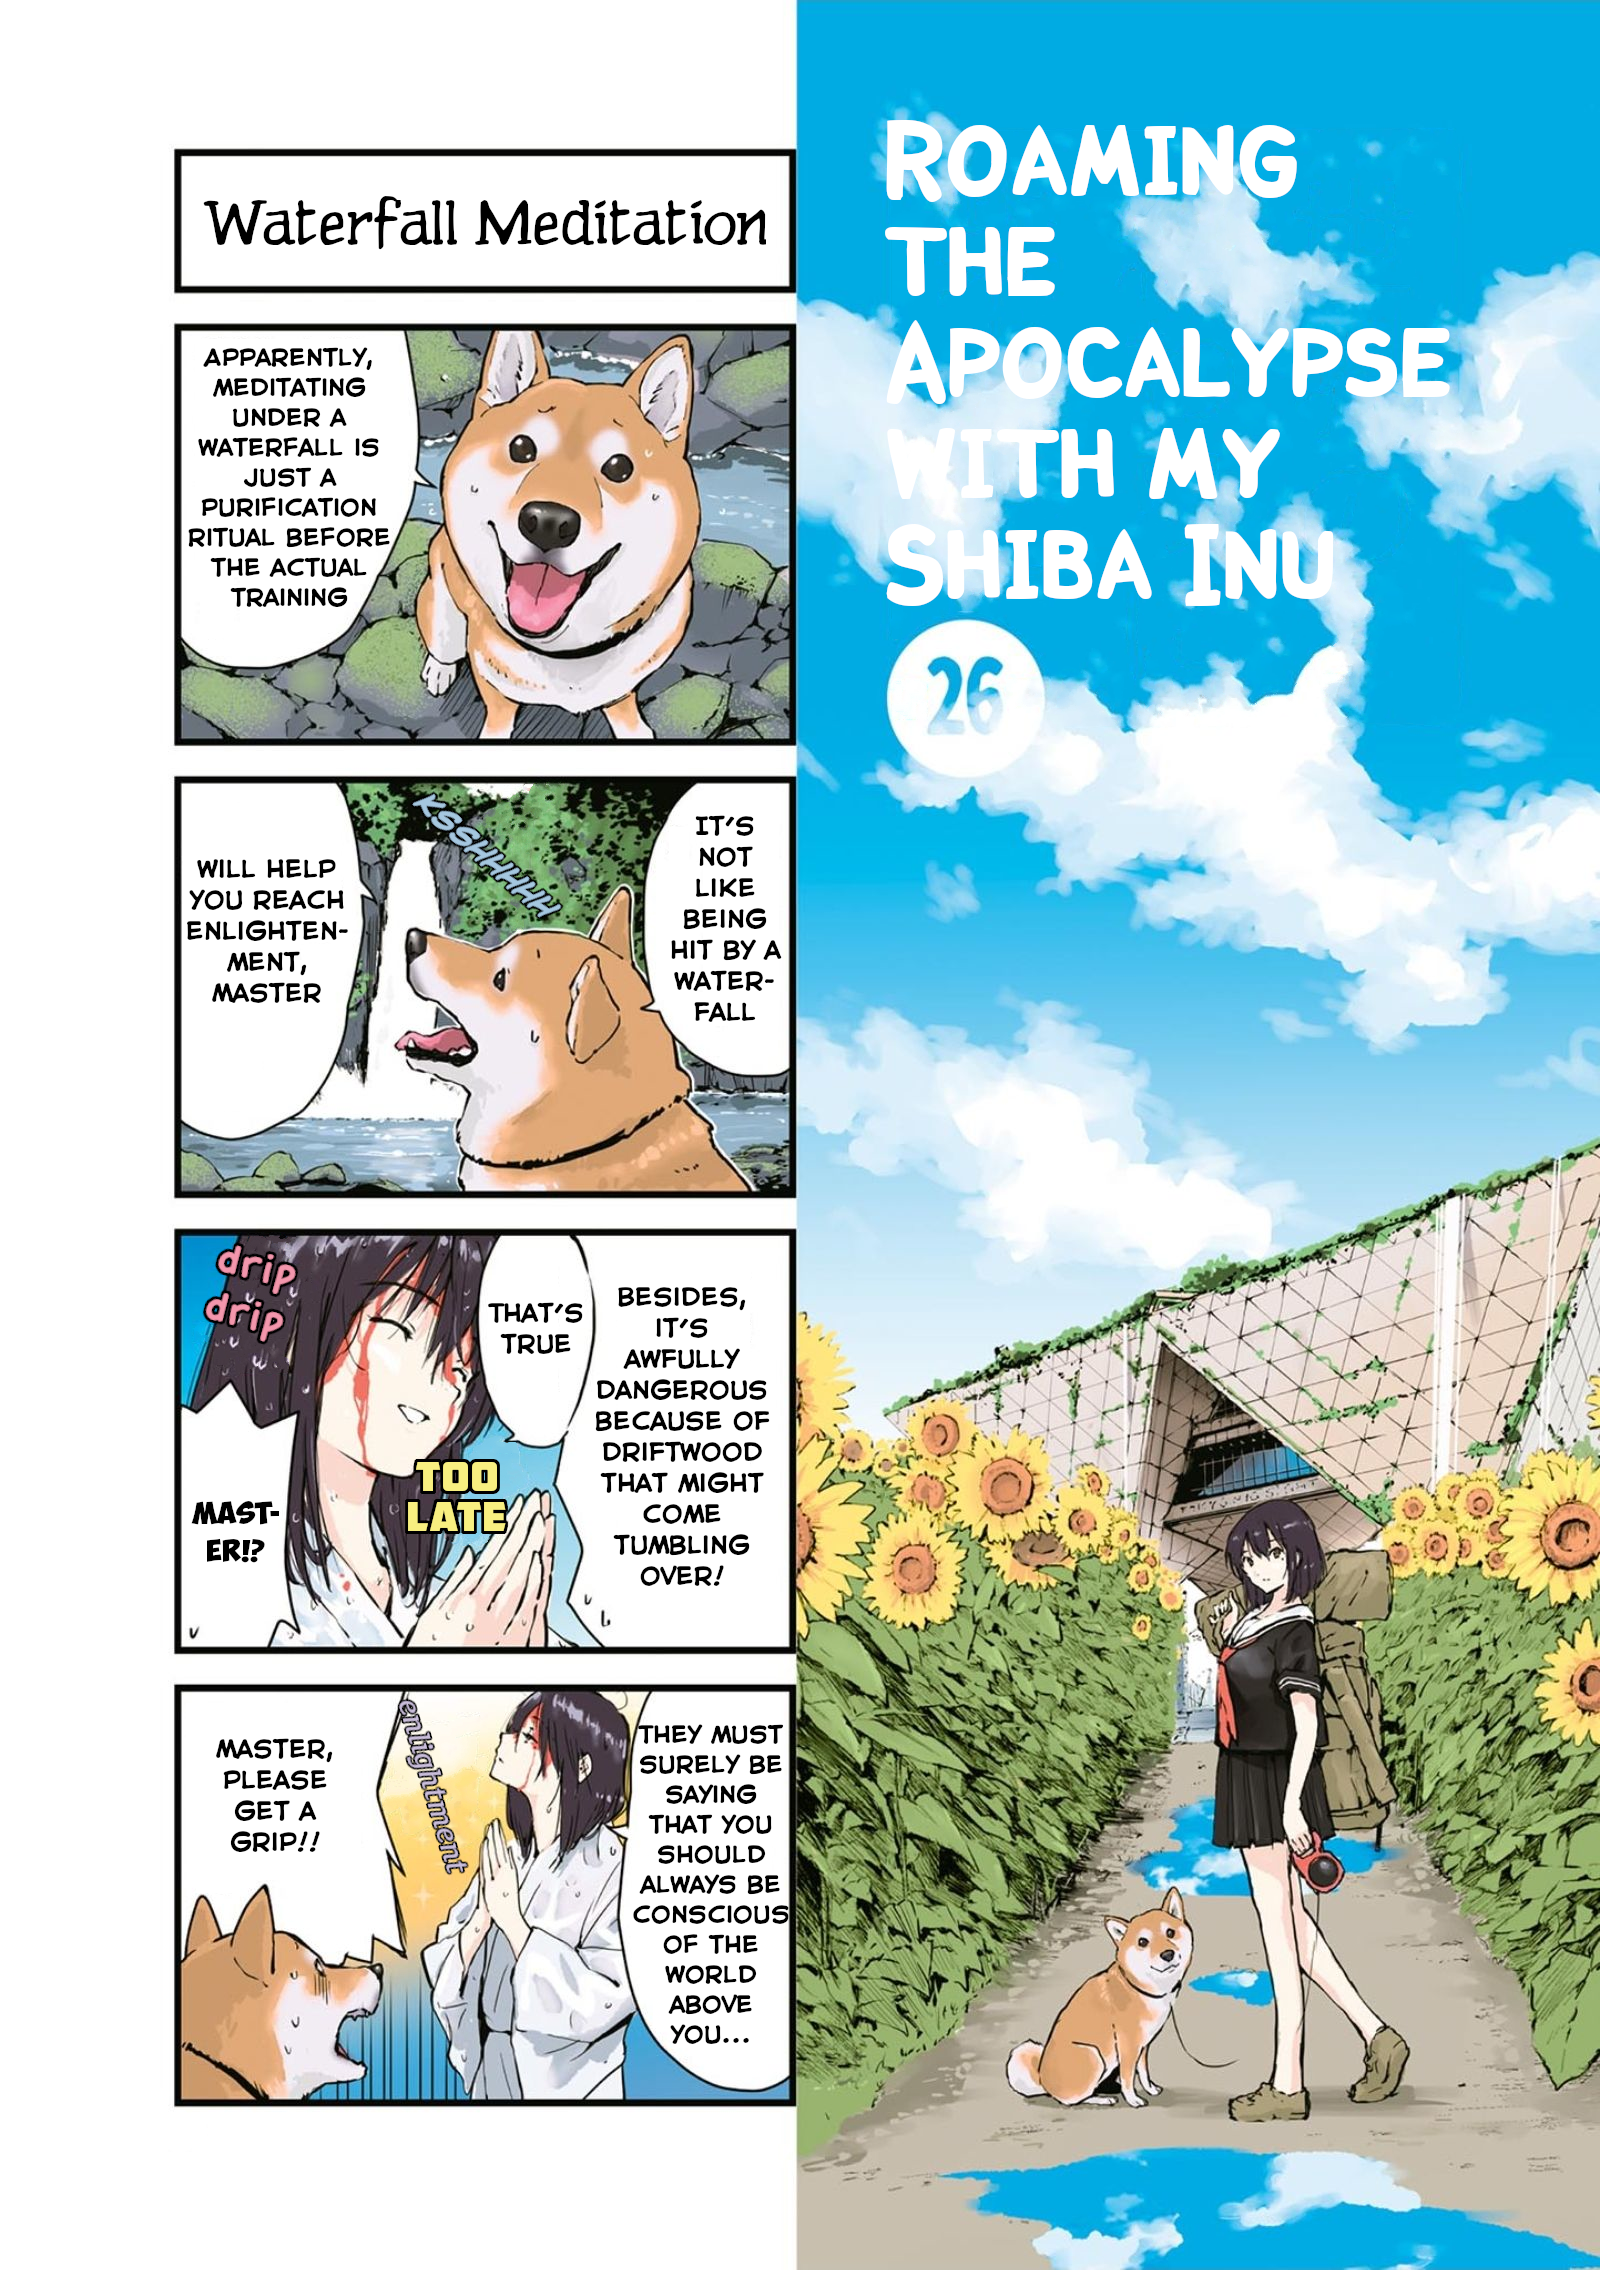 Roaming The Apocalypse With My Shiba Inu Vol.2 Chapter 26 - Picture 1